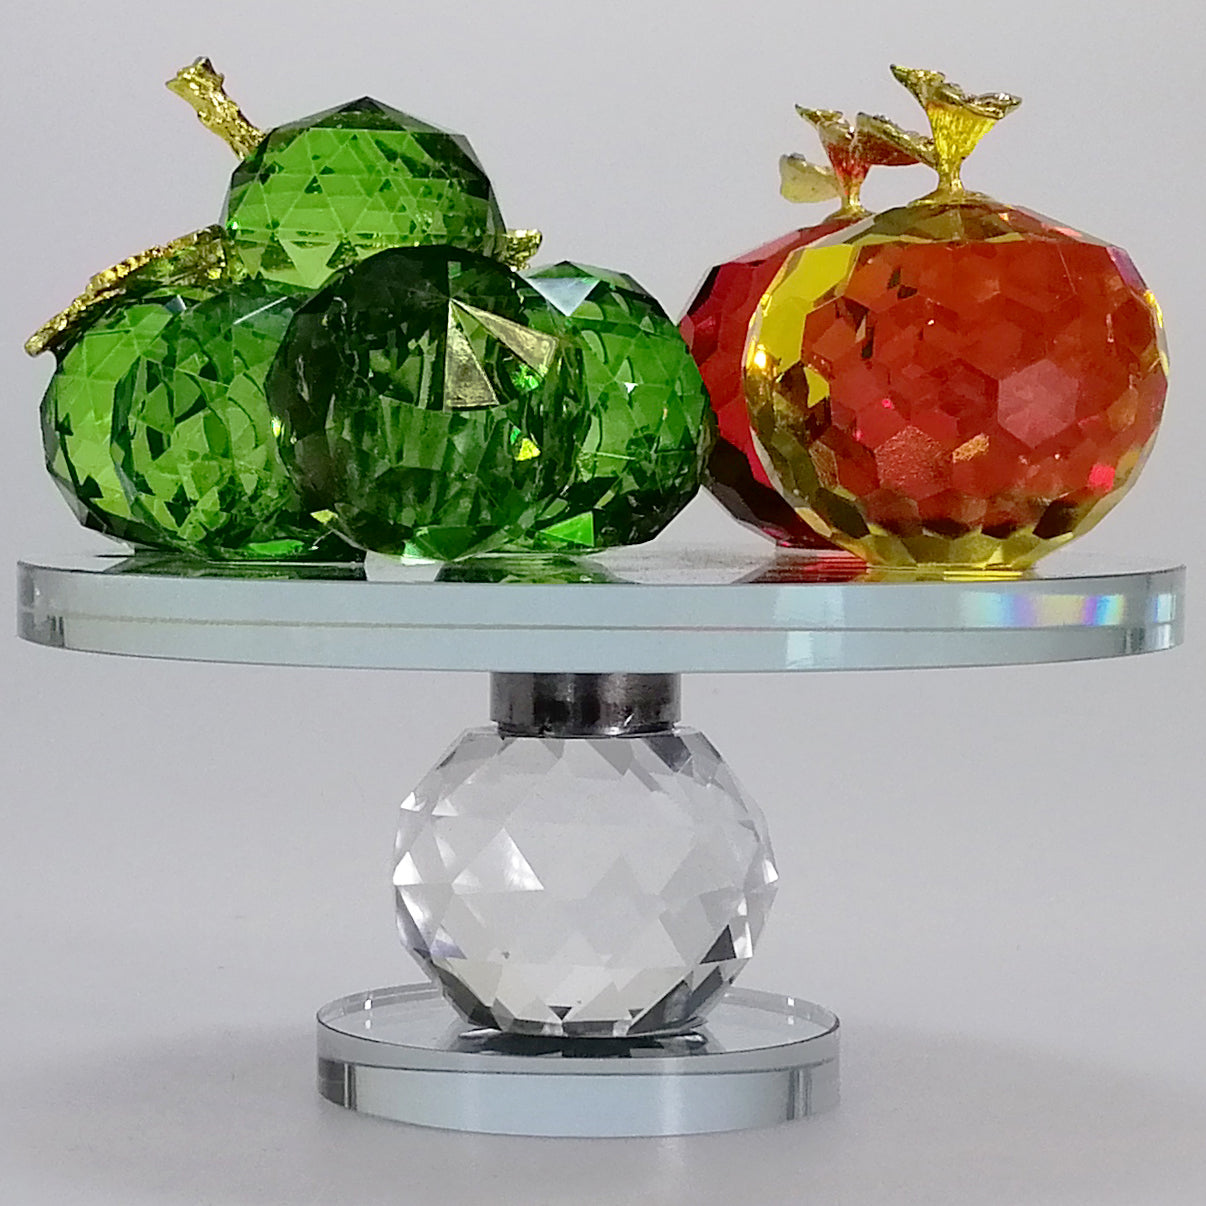 Glass Apples & Grapes on Turnable Plate